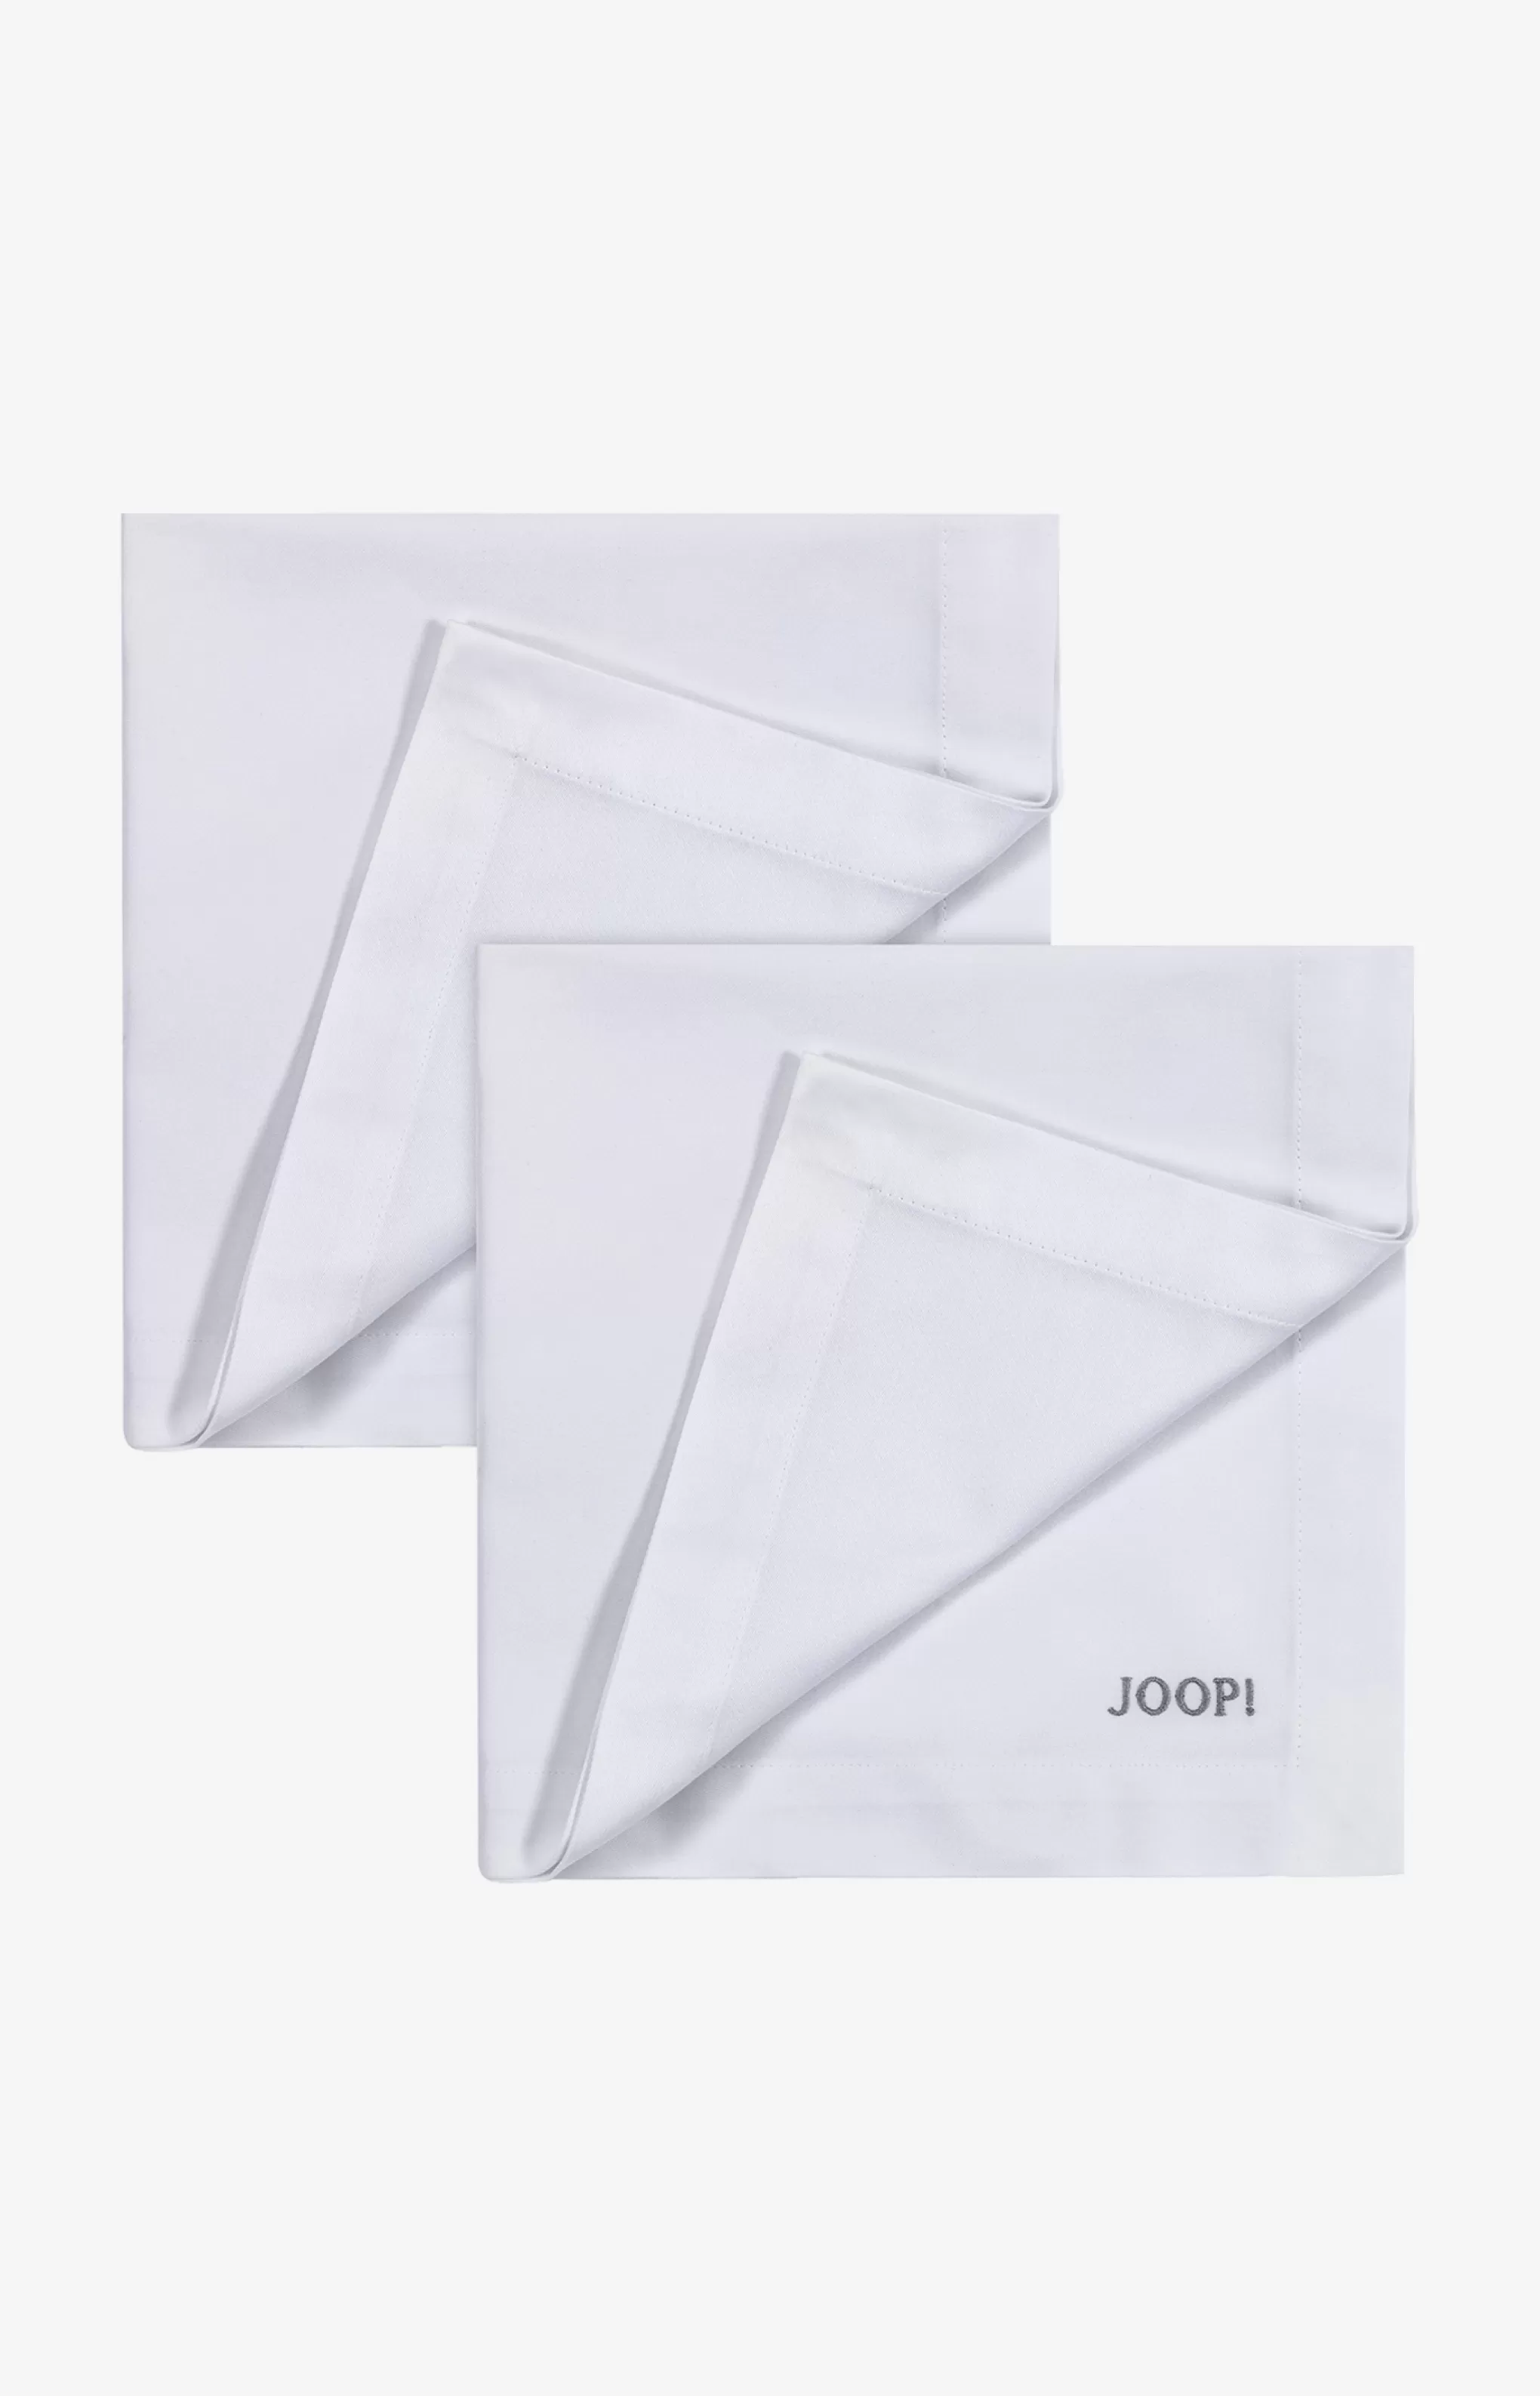 Tablecloths & Placemats | Discover Everything*JOOP Tablecloths & Placemats | Discover Everything linens! STITCH